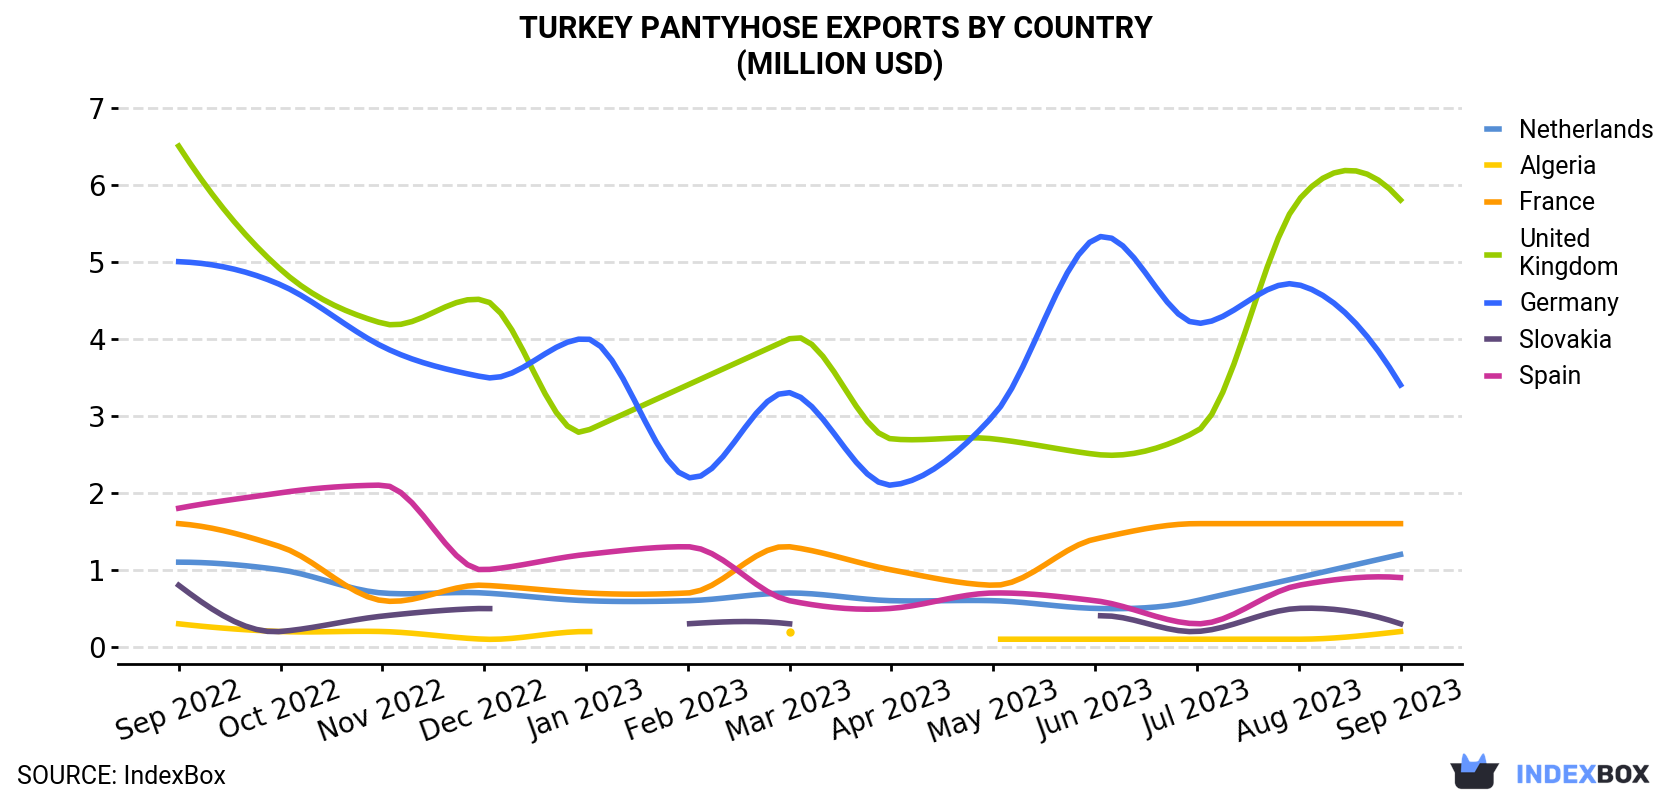 Turkey Pantyhose Exports By Country (Million USD)